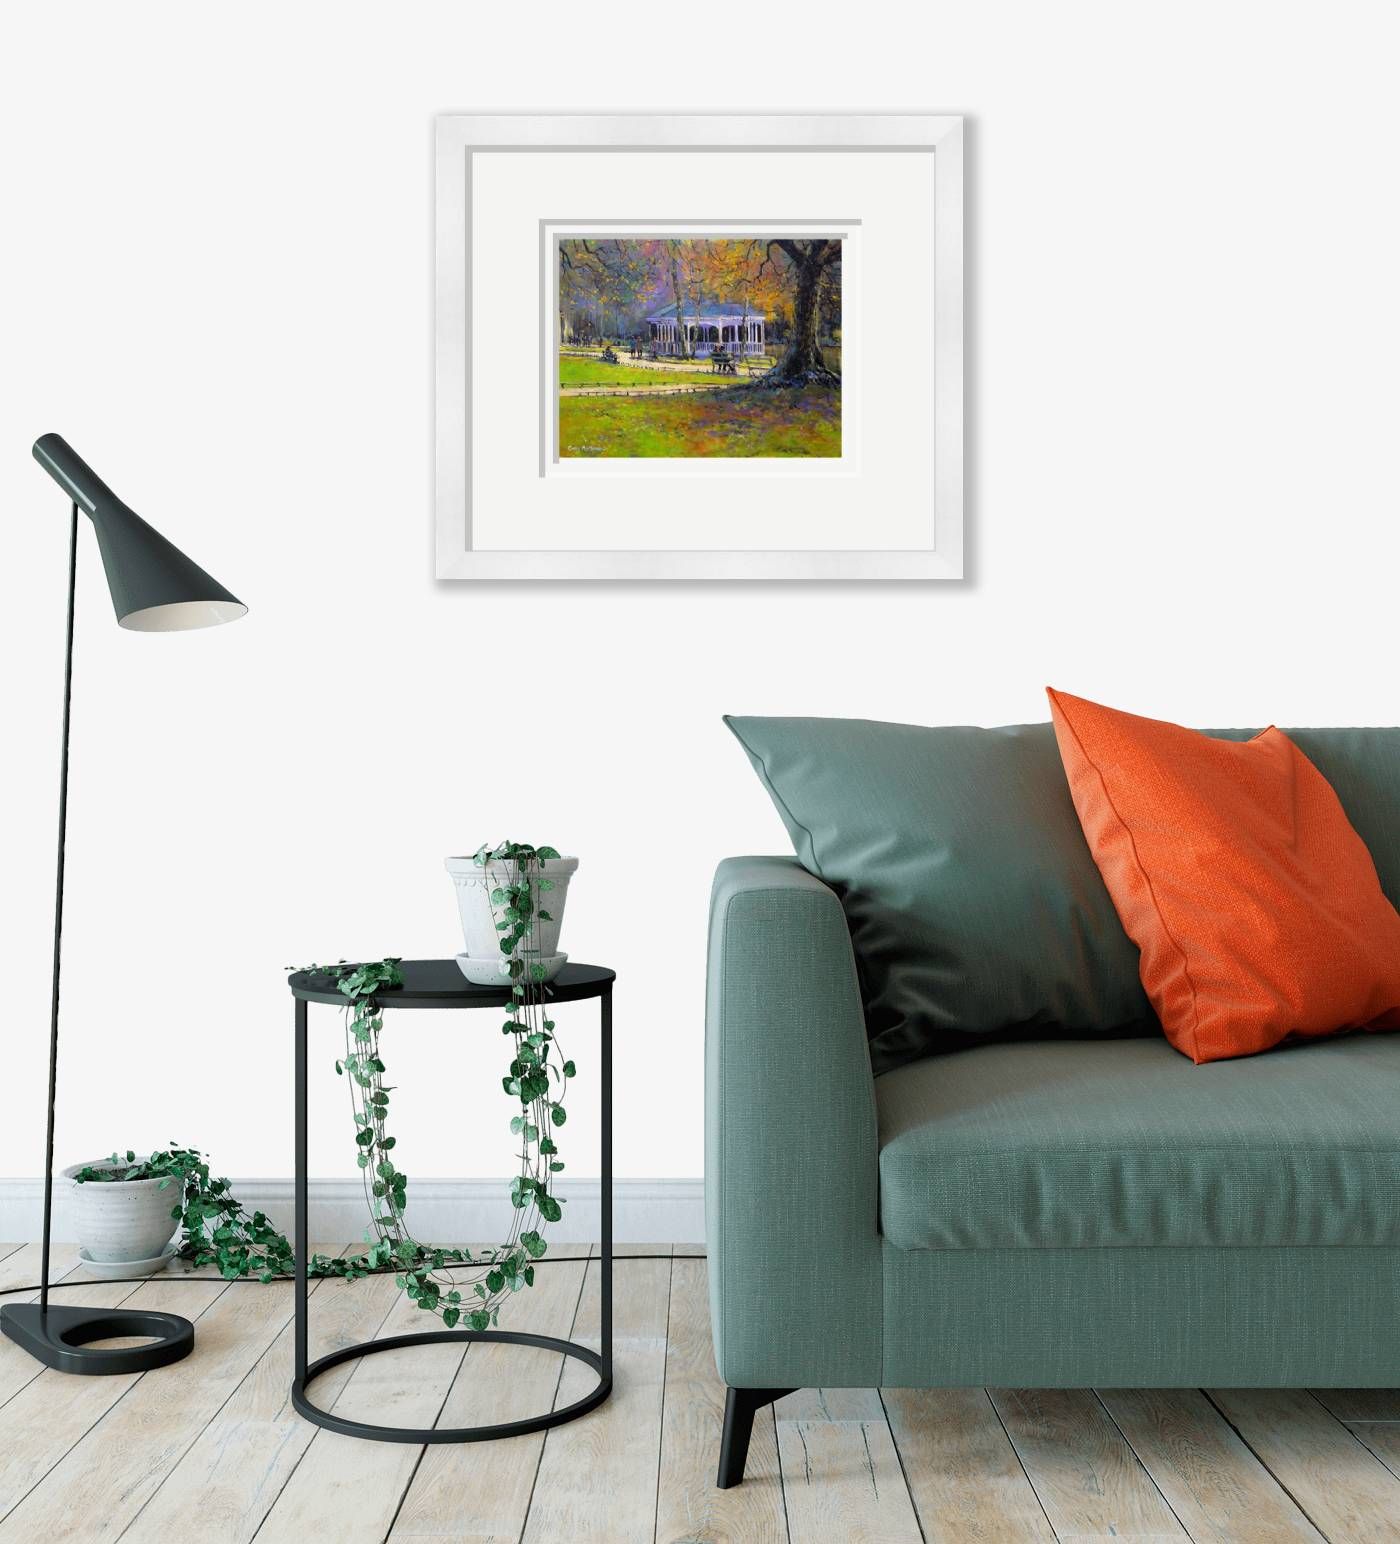 Large framed - Summer in the Green, Dublin 101 by Chris McMorrow